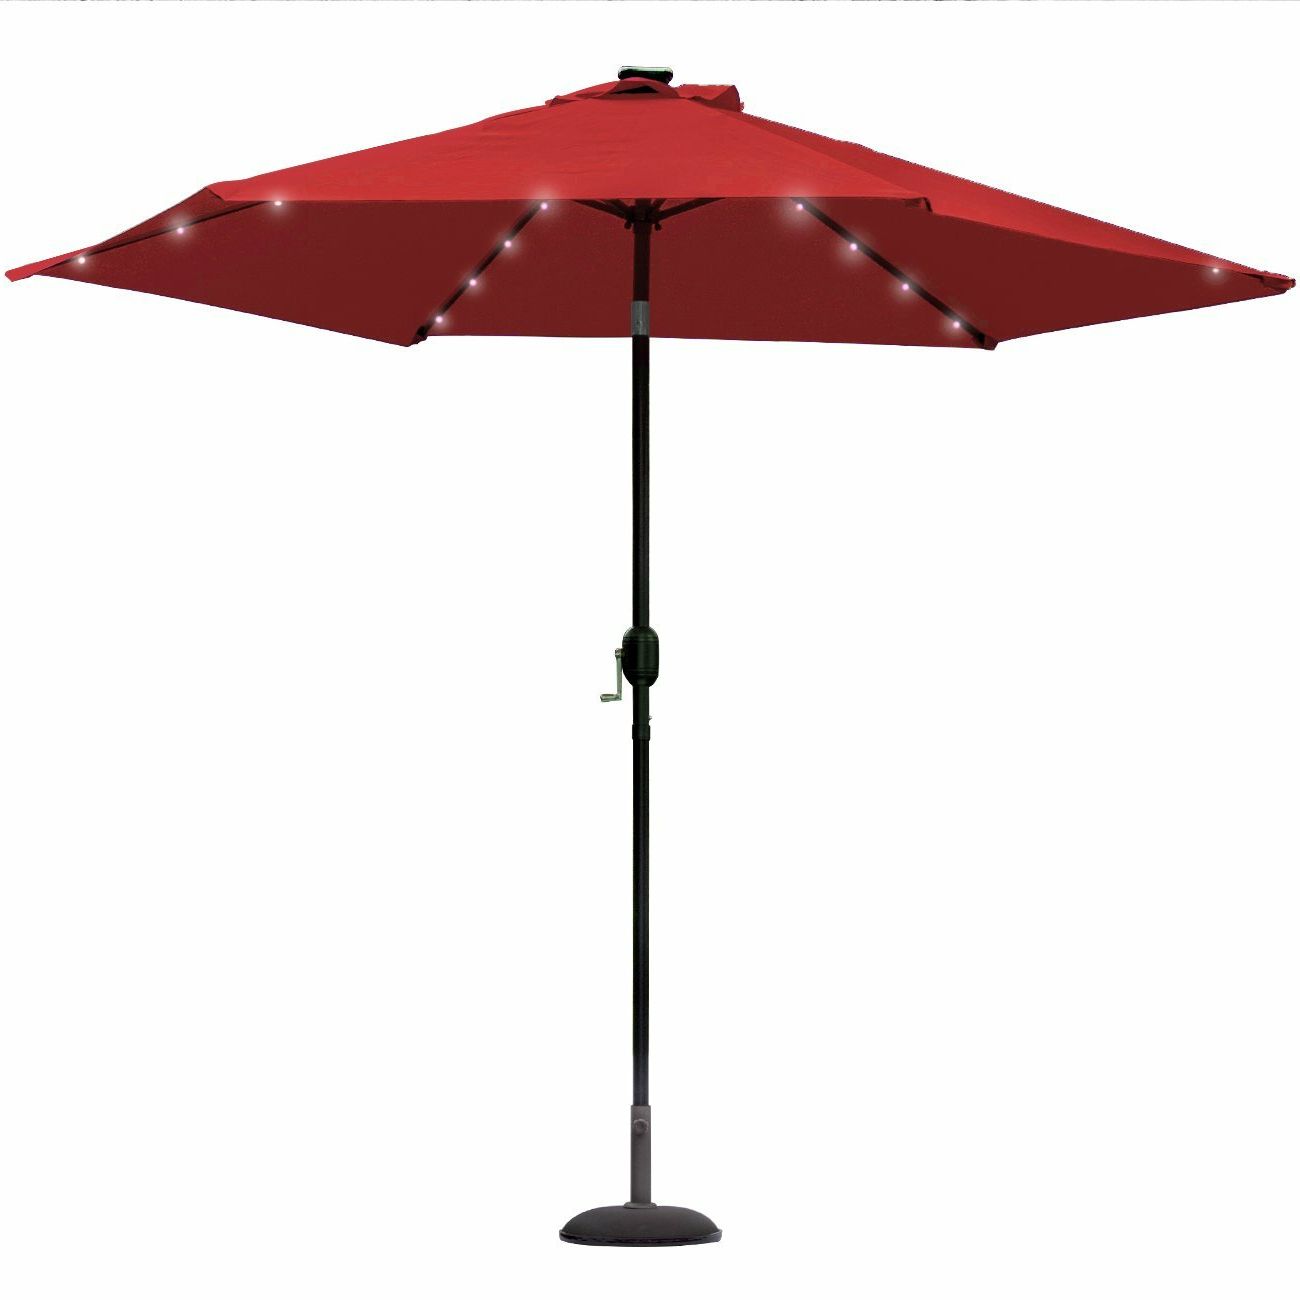 Darby Home Co Rahate Solar Led Outdoor 10' Market Umbrella Inside Well Known Herlinda Solar Lighted Market Umbrellas (View 19 of 20)